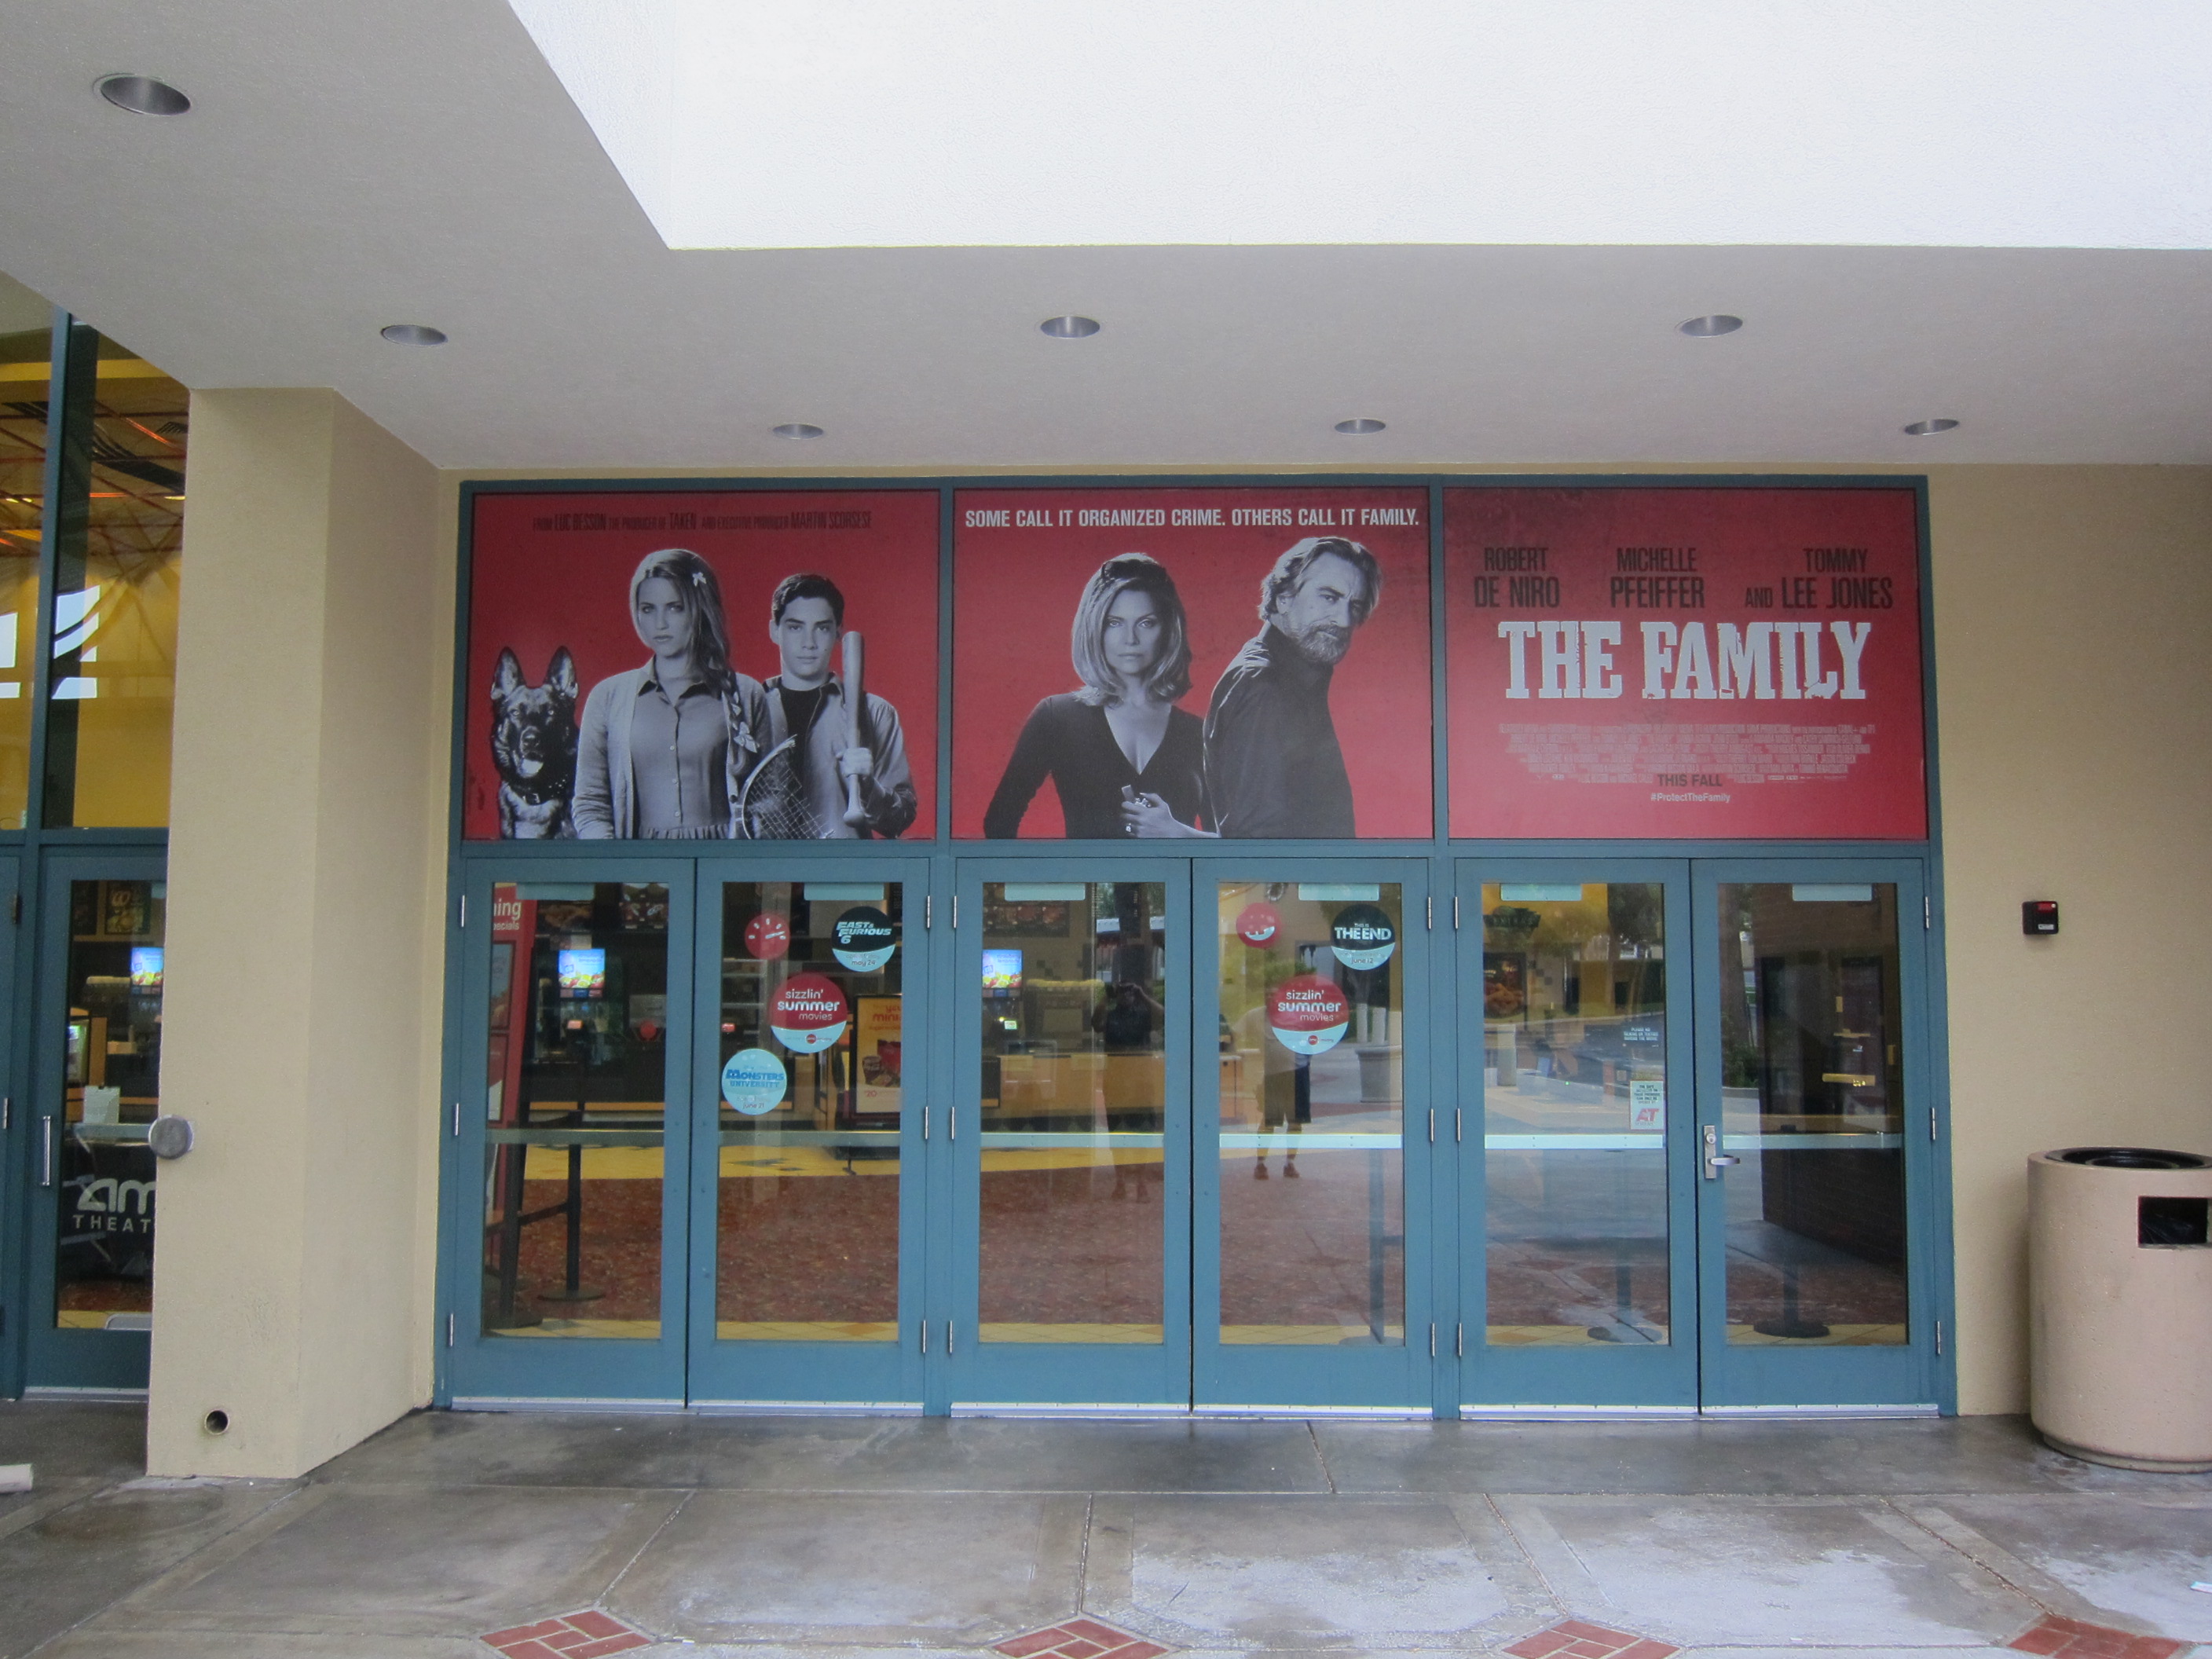 THE FAMILY at the AMC Rolling Hills Theatre in Southern California.